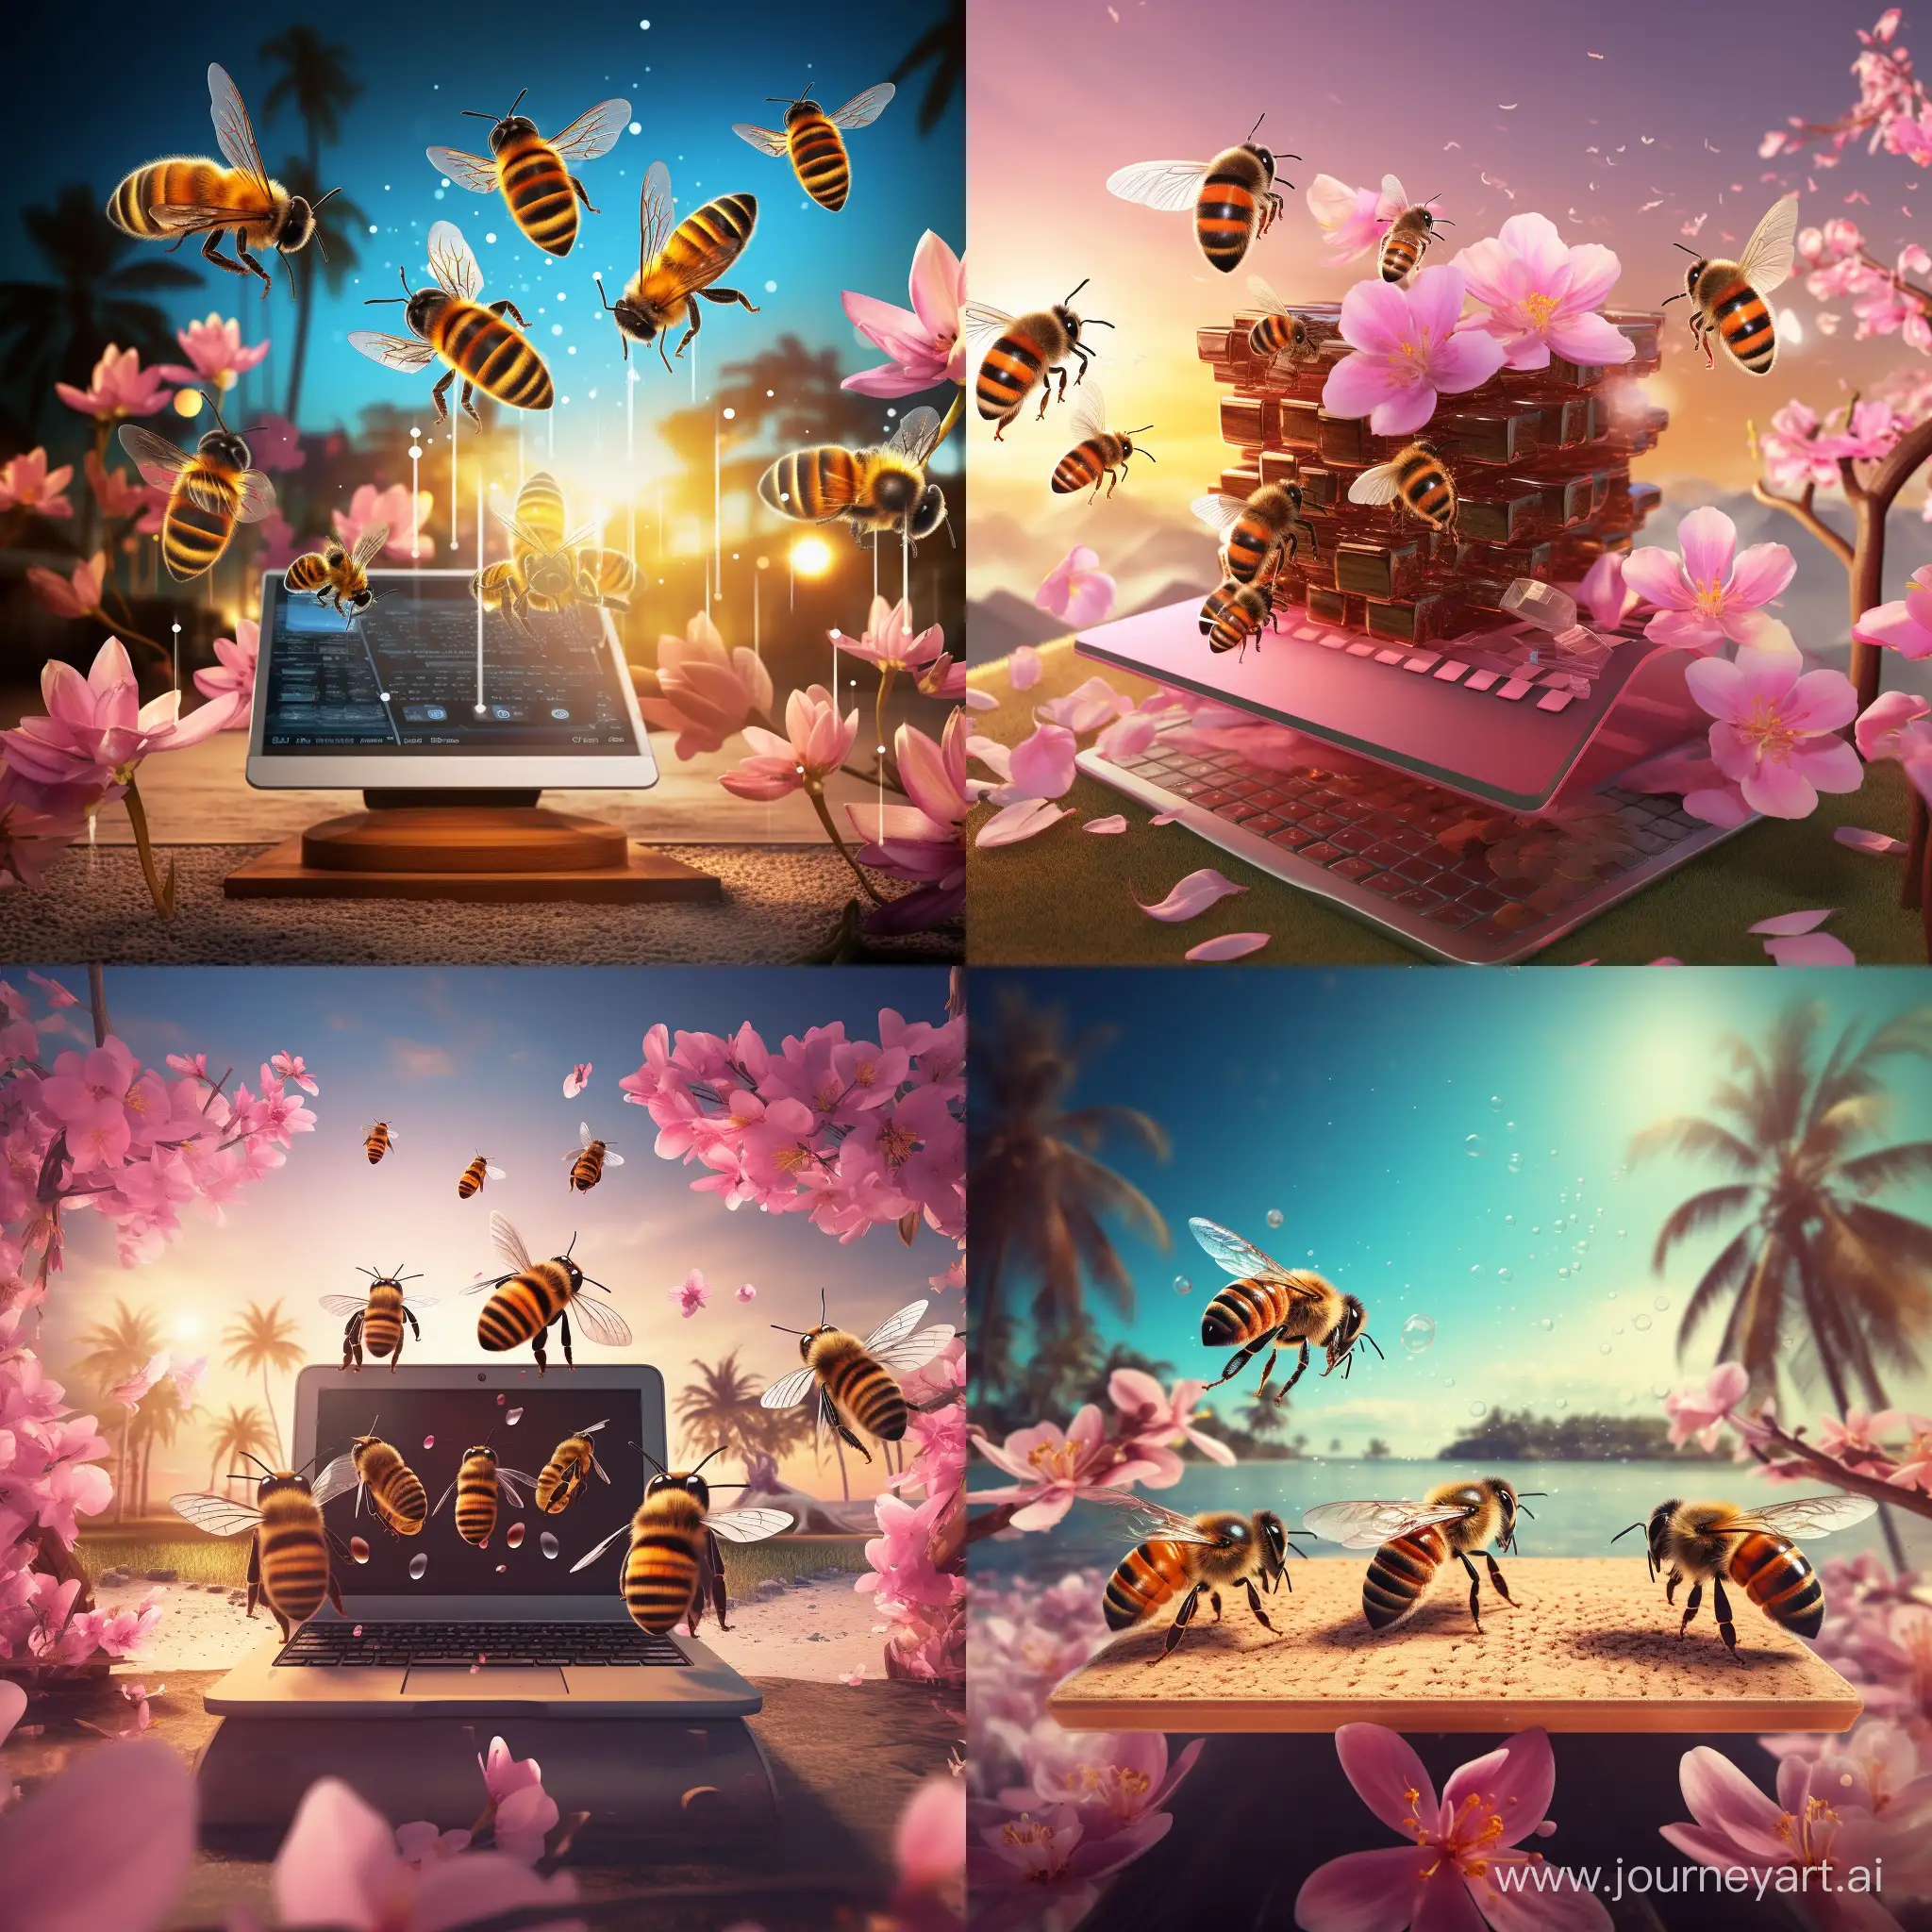 Joyful-Bees-Creating-Web-Apps-in-a-Tropical-Oasis